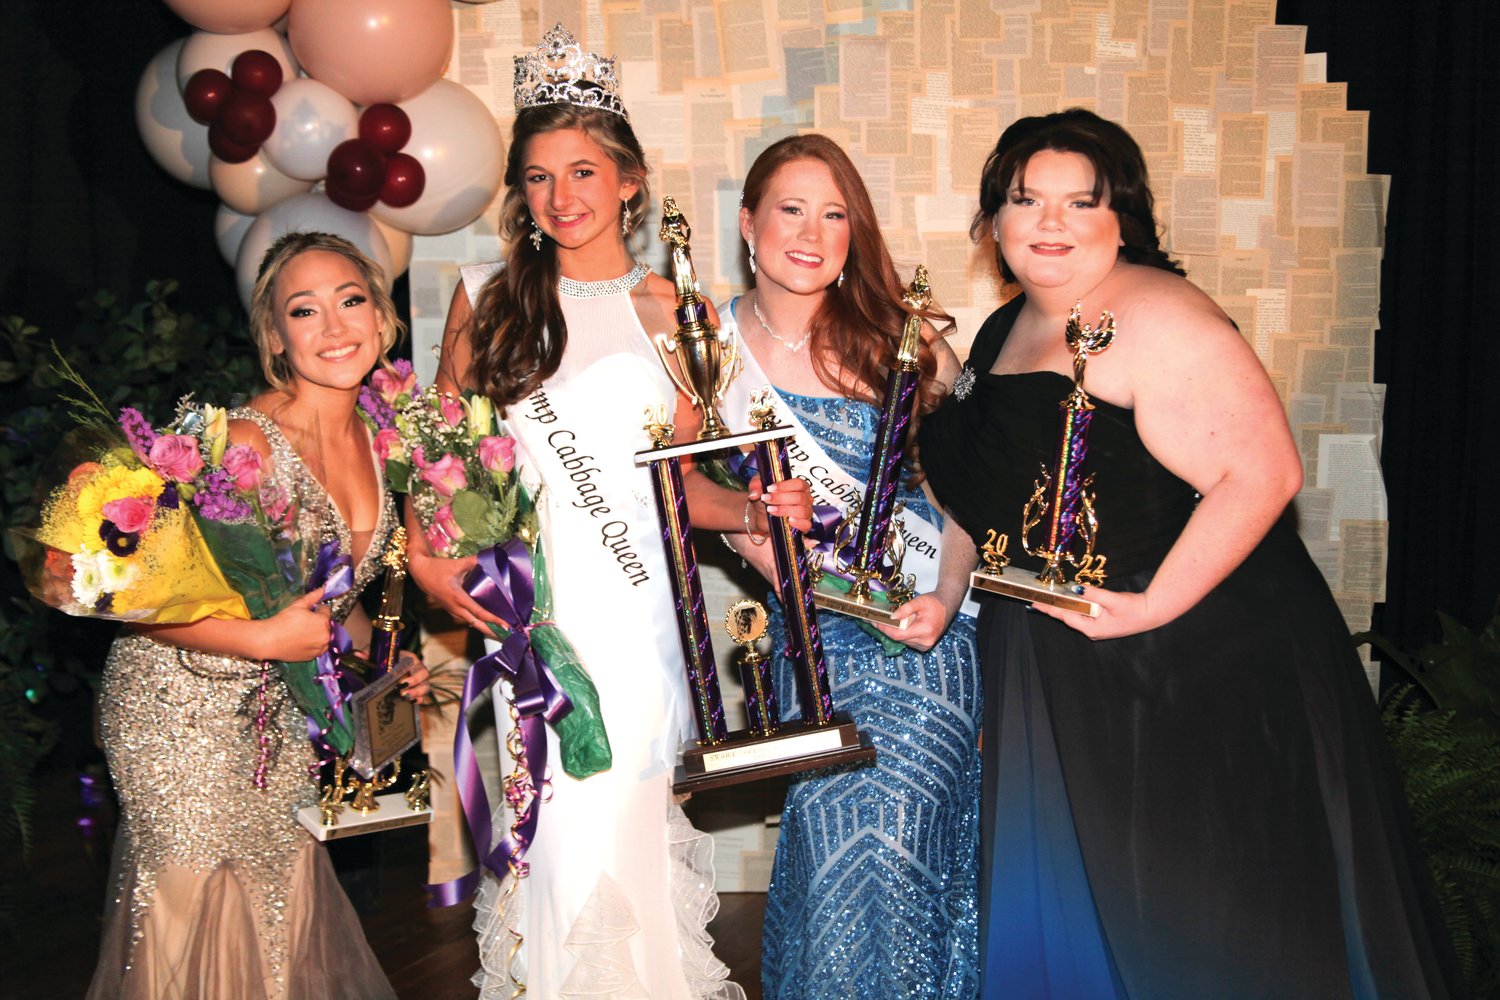 In the Swamp Cabbage Queen contest, left to right are: Second Runner Up Hailey Prince, 2022 Swamp Cabbage Queen Grace Ryan, First Runner-Up Ryley Bourdeau, and Most Talented Emyllee Hull. [Photo by Jerri Blake]